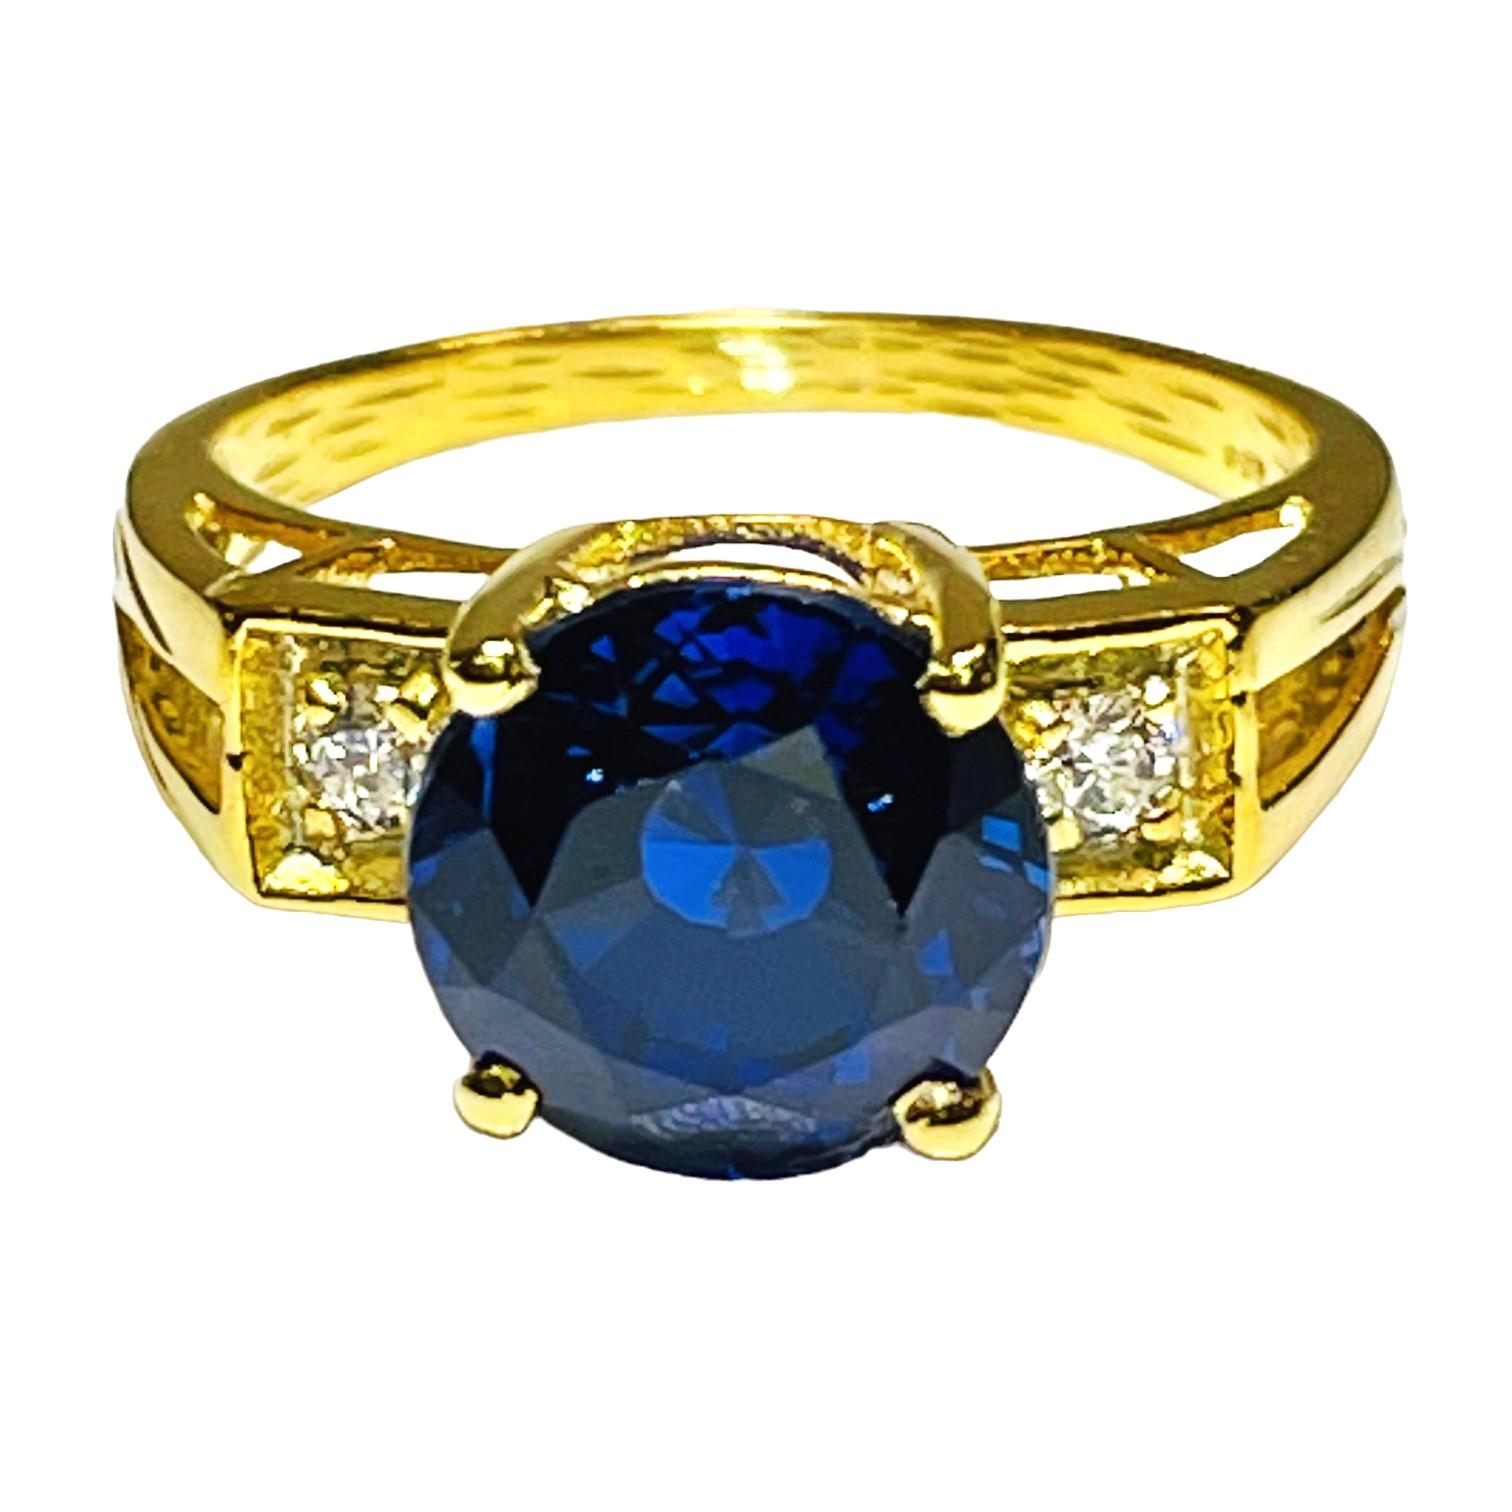 This stone was mined in Africa and is very rich in color.   It is a beautiful round cut stone and is 4.70 Ct   The main stone is 9 mm.  It is flanked by small diamond cut white sapphires.  Very beautiful  indeed.  Sure to get noticed.  The weight in